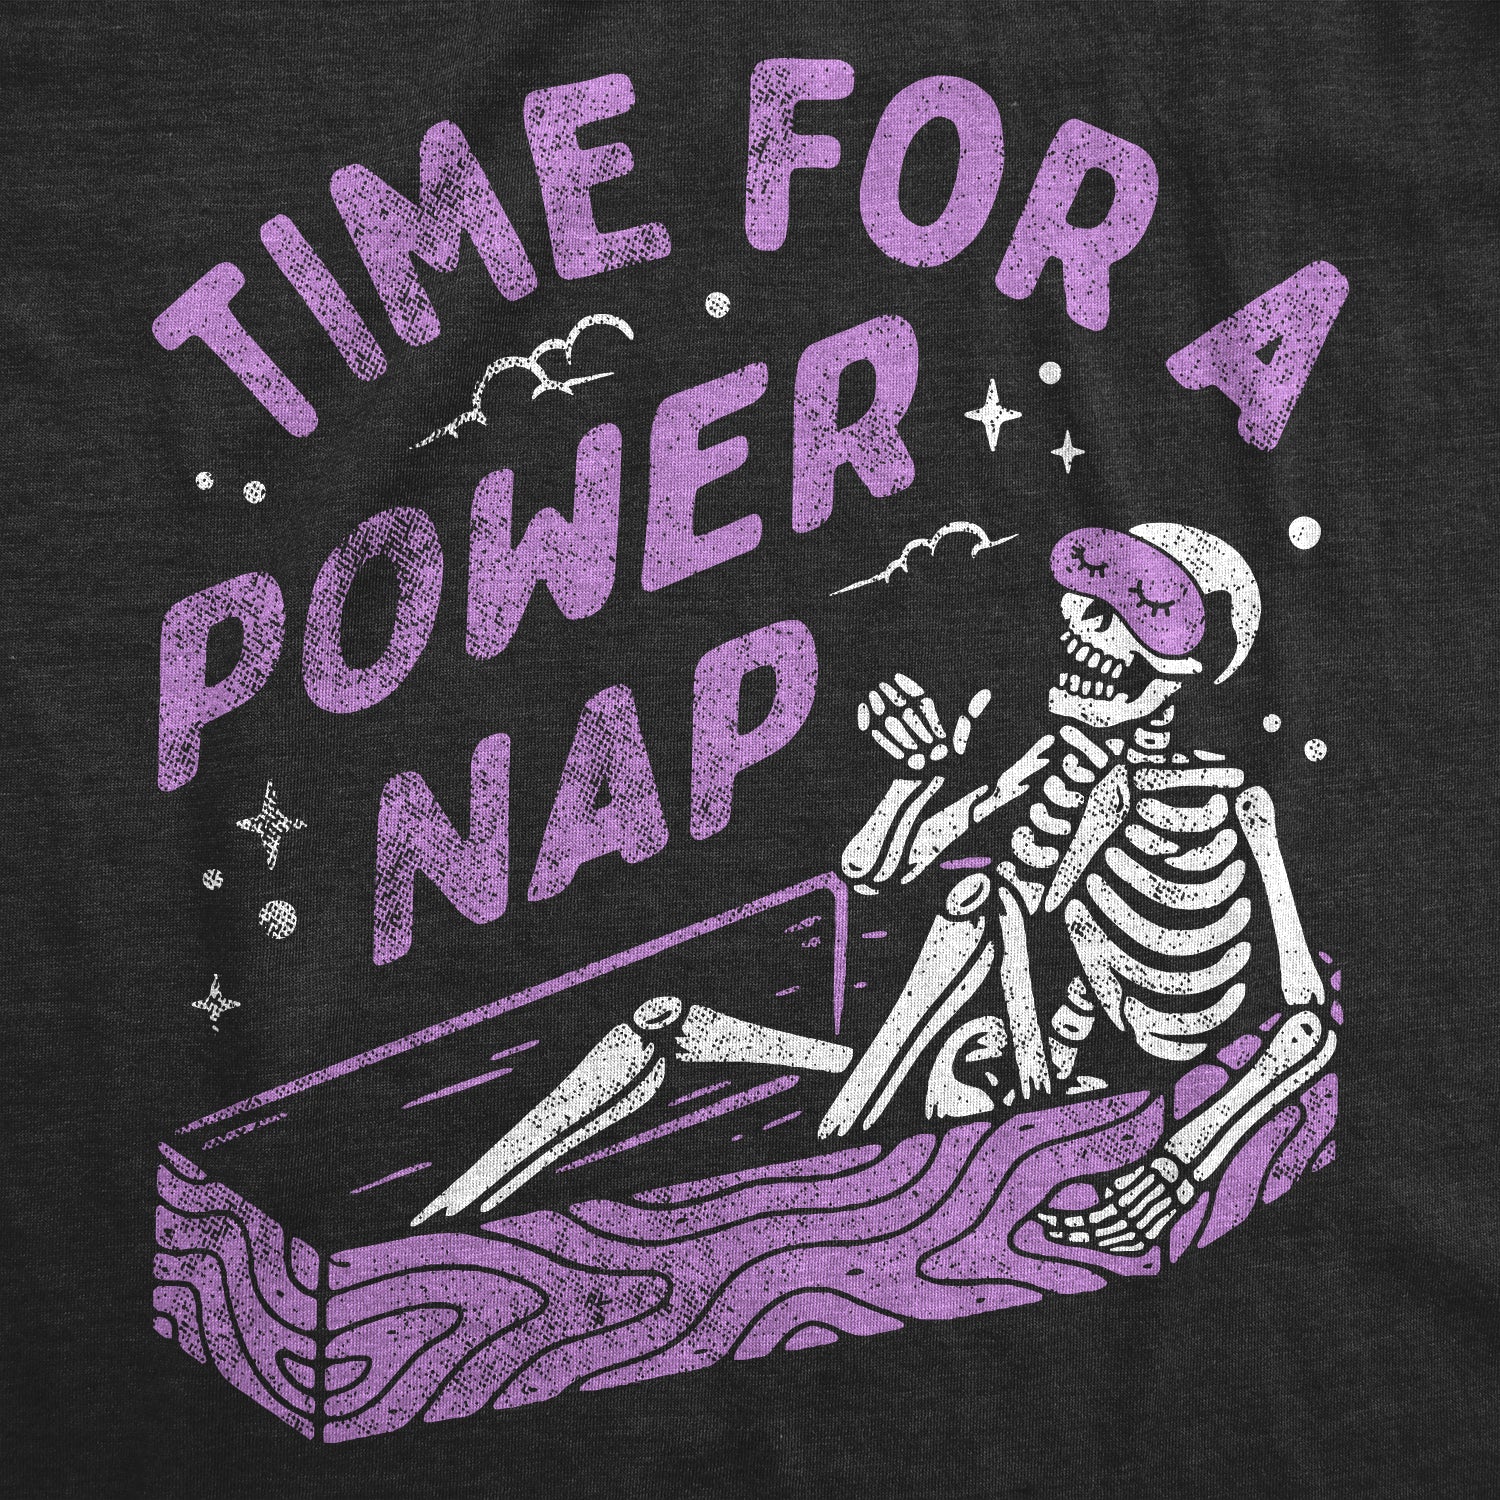 Funny Heather Black - POWERNAP Time For A Power Nap Womens T Shirt Nerdy halloween Sarcastic Tee